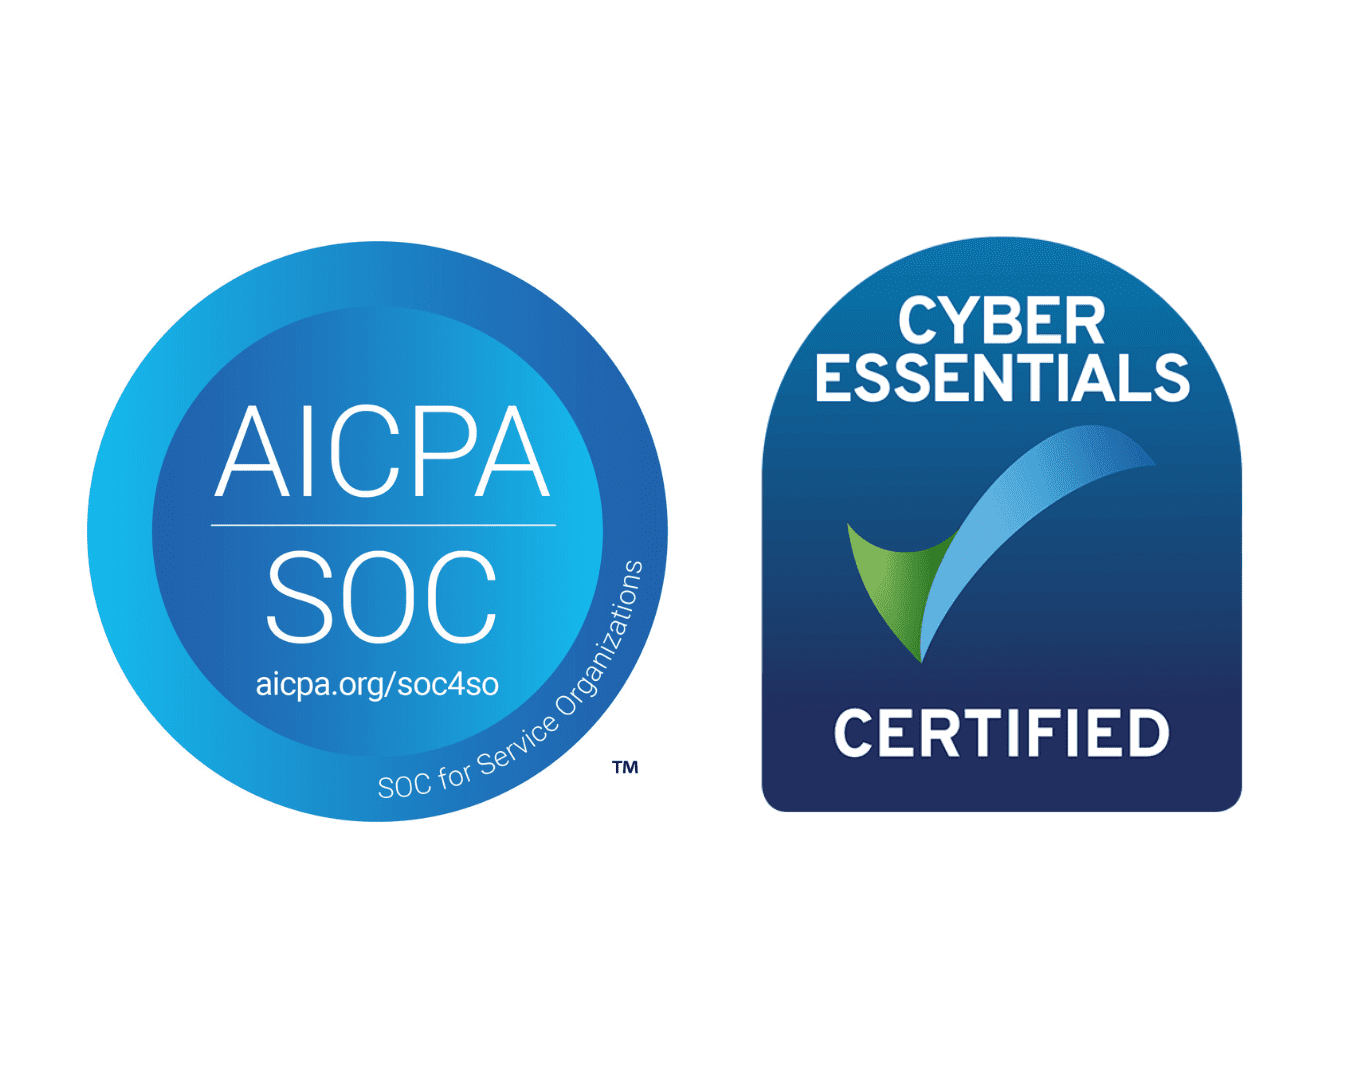 These are logos are of AICPA SOC type 2 and Cyber Essentials certifications